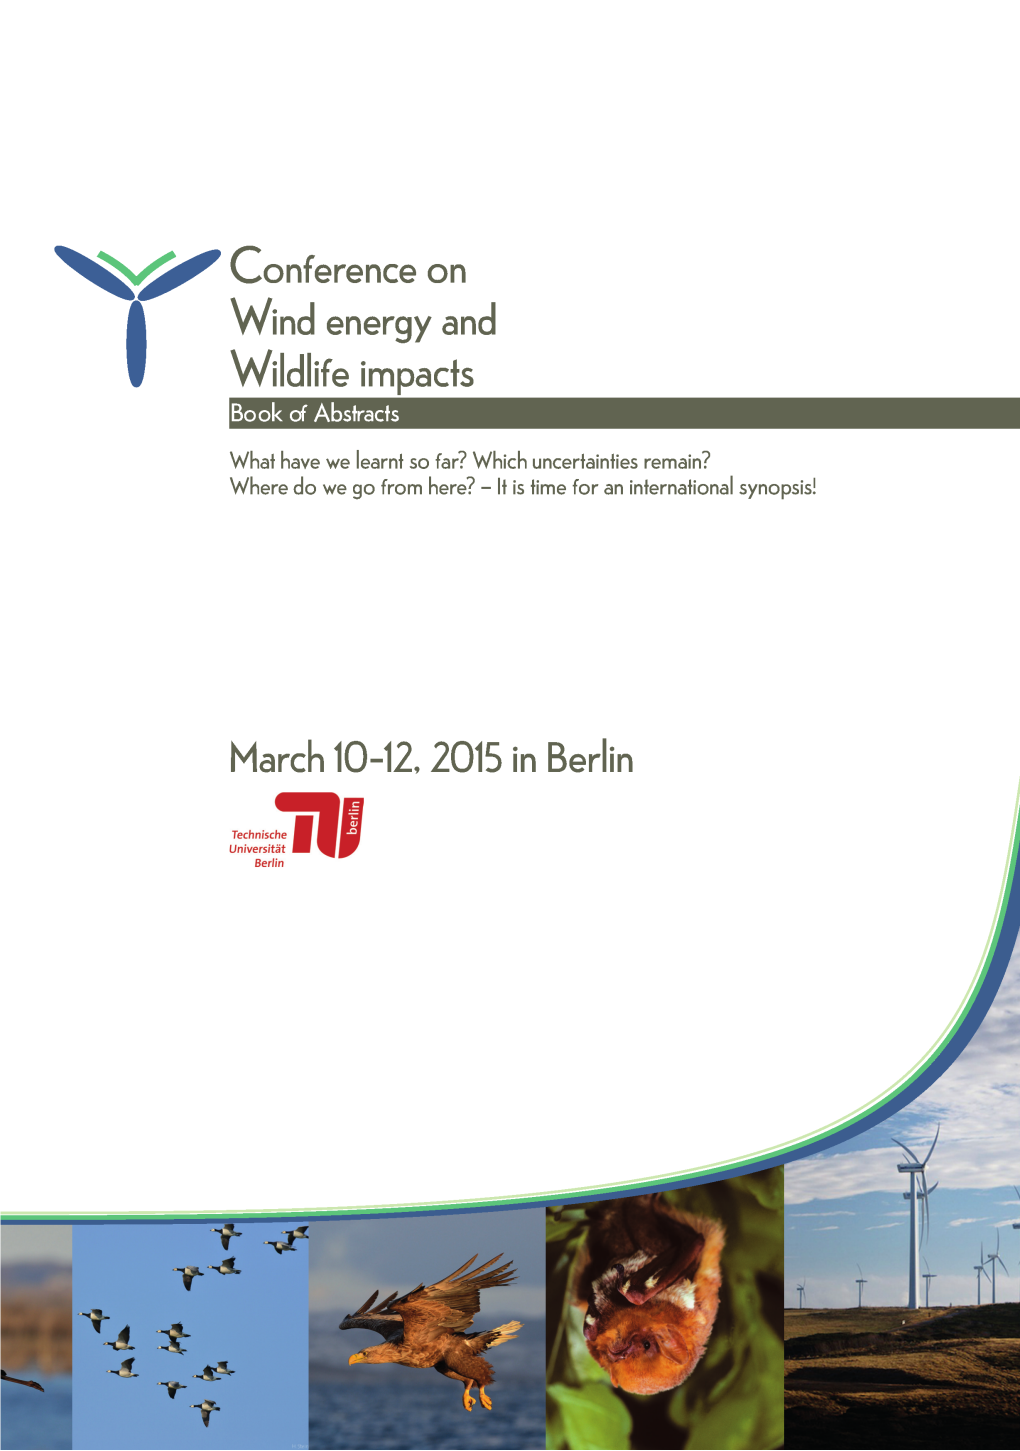 Book of Abstracts Conference on Wind Energy and Wildlife Impacts